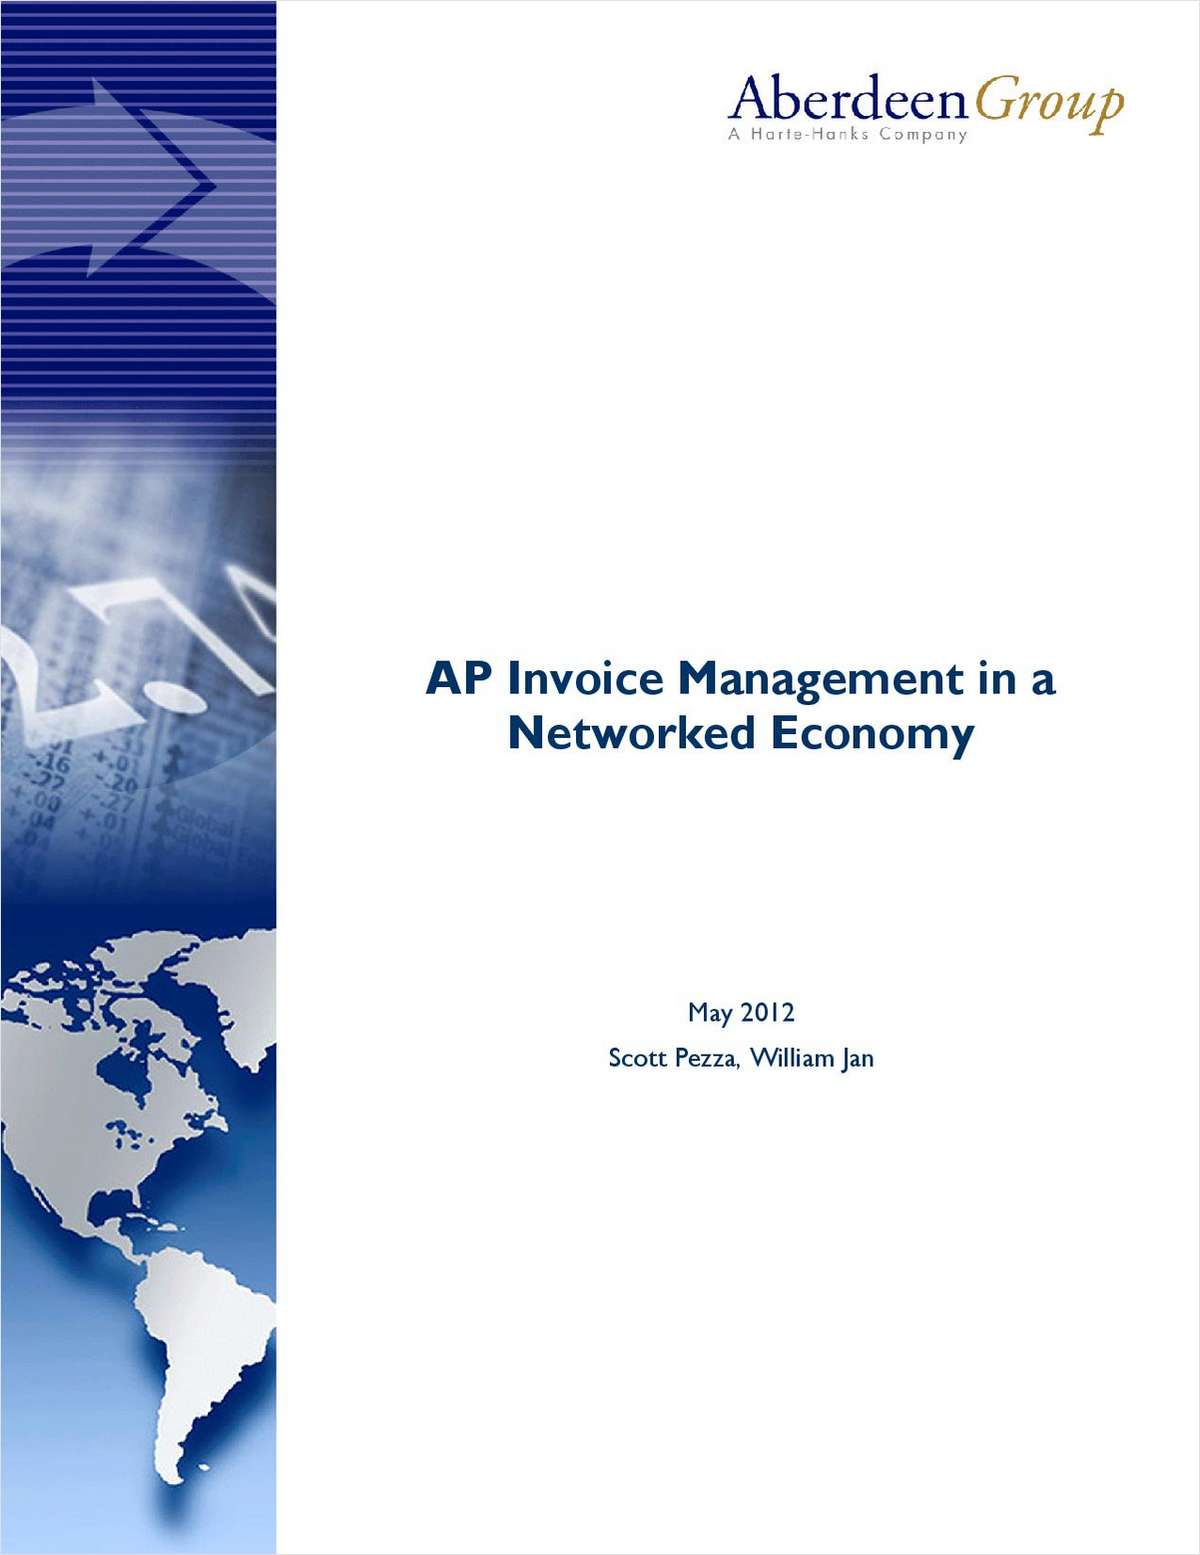 AP Invoice Management in a Networked Economy